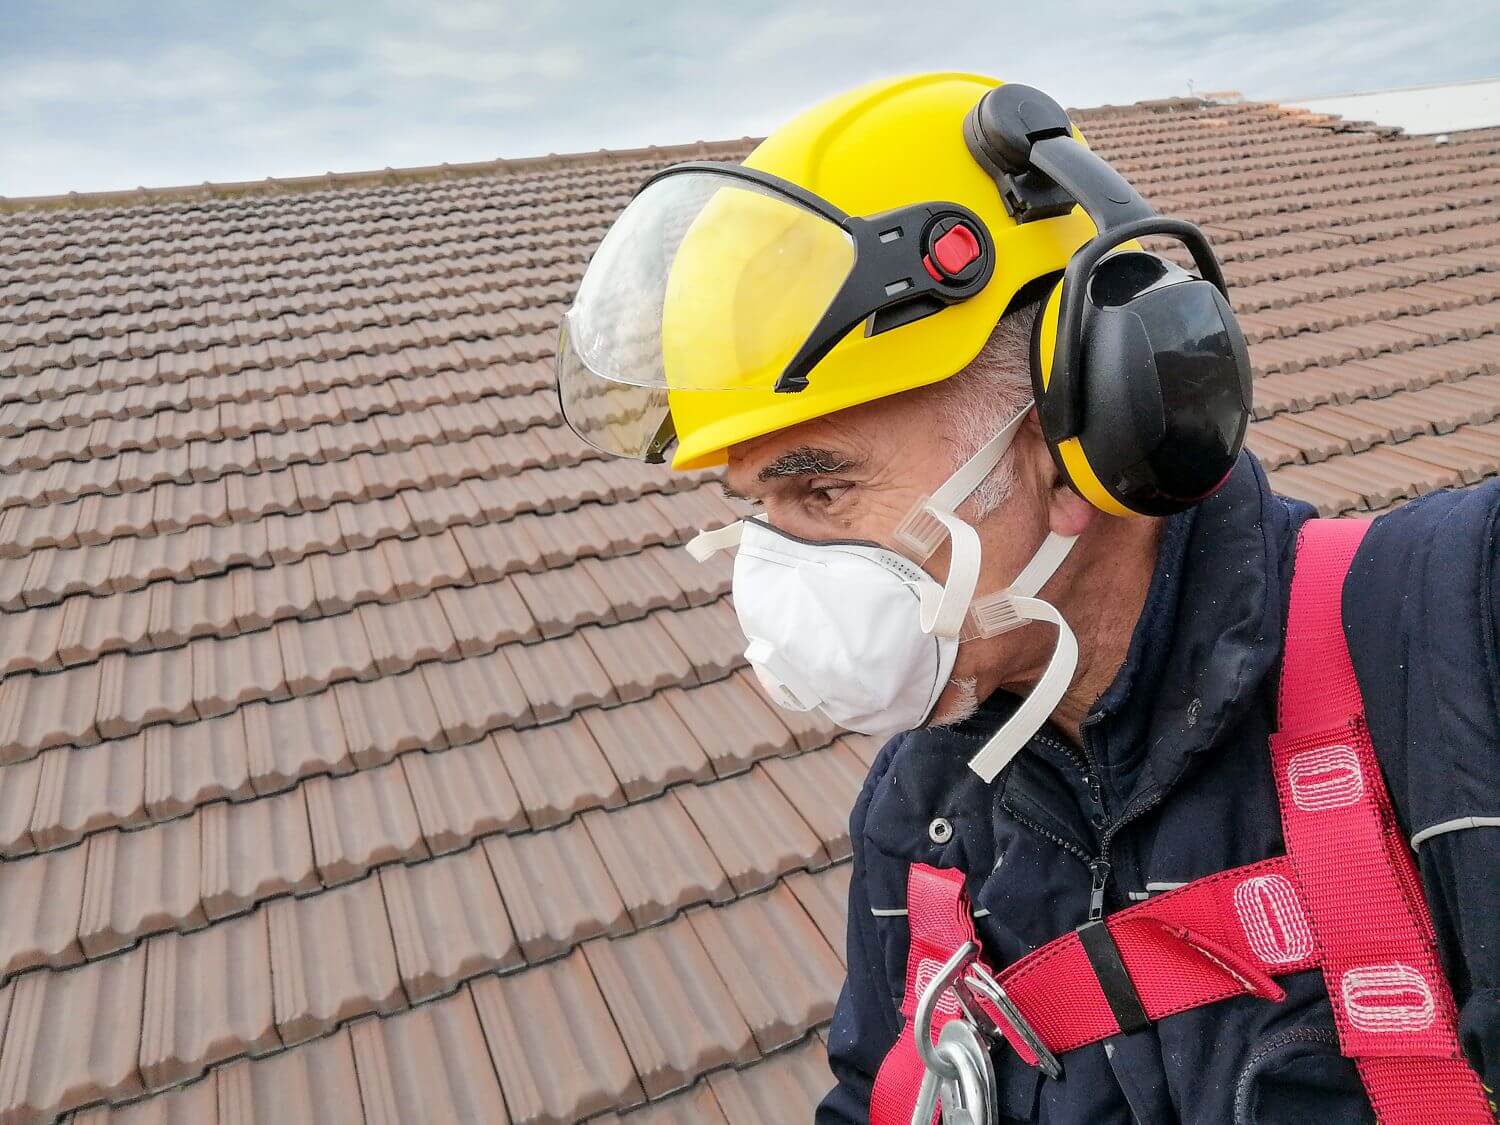 Should I Get Roofing Services During The COVID-19 Pandemic?